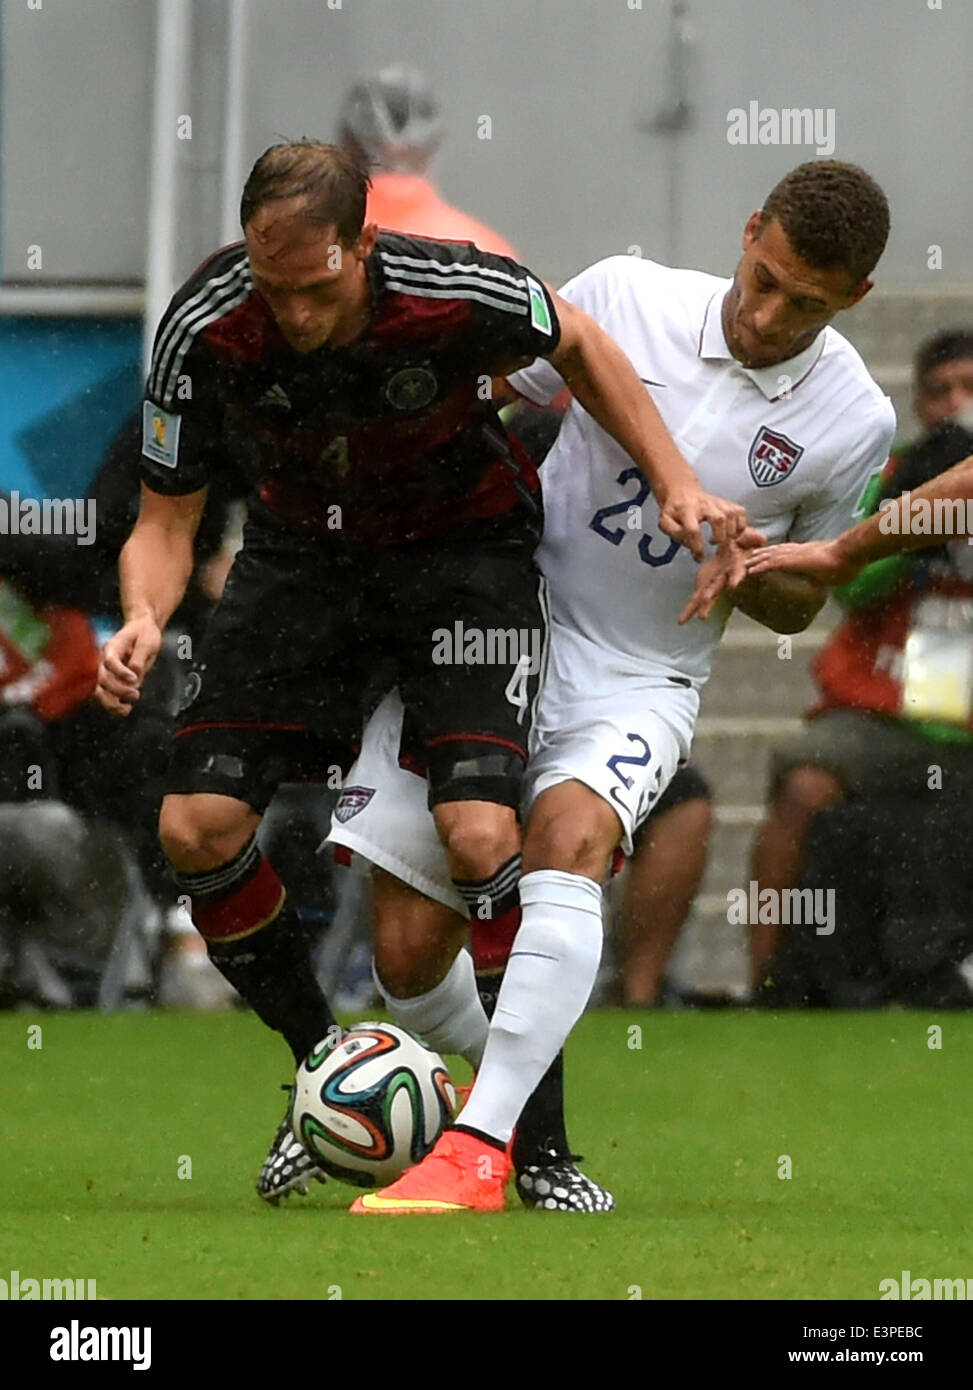 Recife, Brazil. 26th June, 2014. Germany's Benedikt Howedes (L) vies with Fabian Johnson of the U.S. during a Group G match between the U.S. and Germany of 2014 FIFA World Cup at the Arena Pernambuco Stadium in Recife, Brazil, on June 26, 2014. Credit:  Guo Yong/Xinhua/Alamy Live News Stock Photo